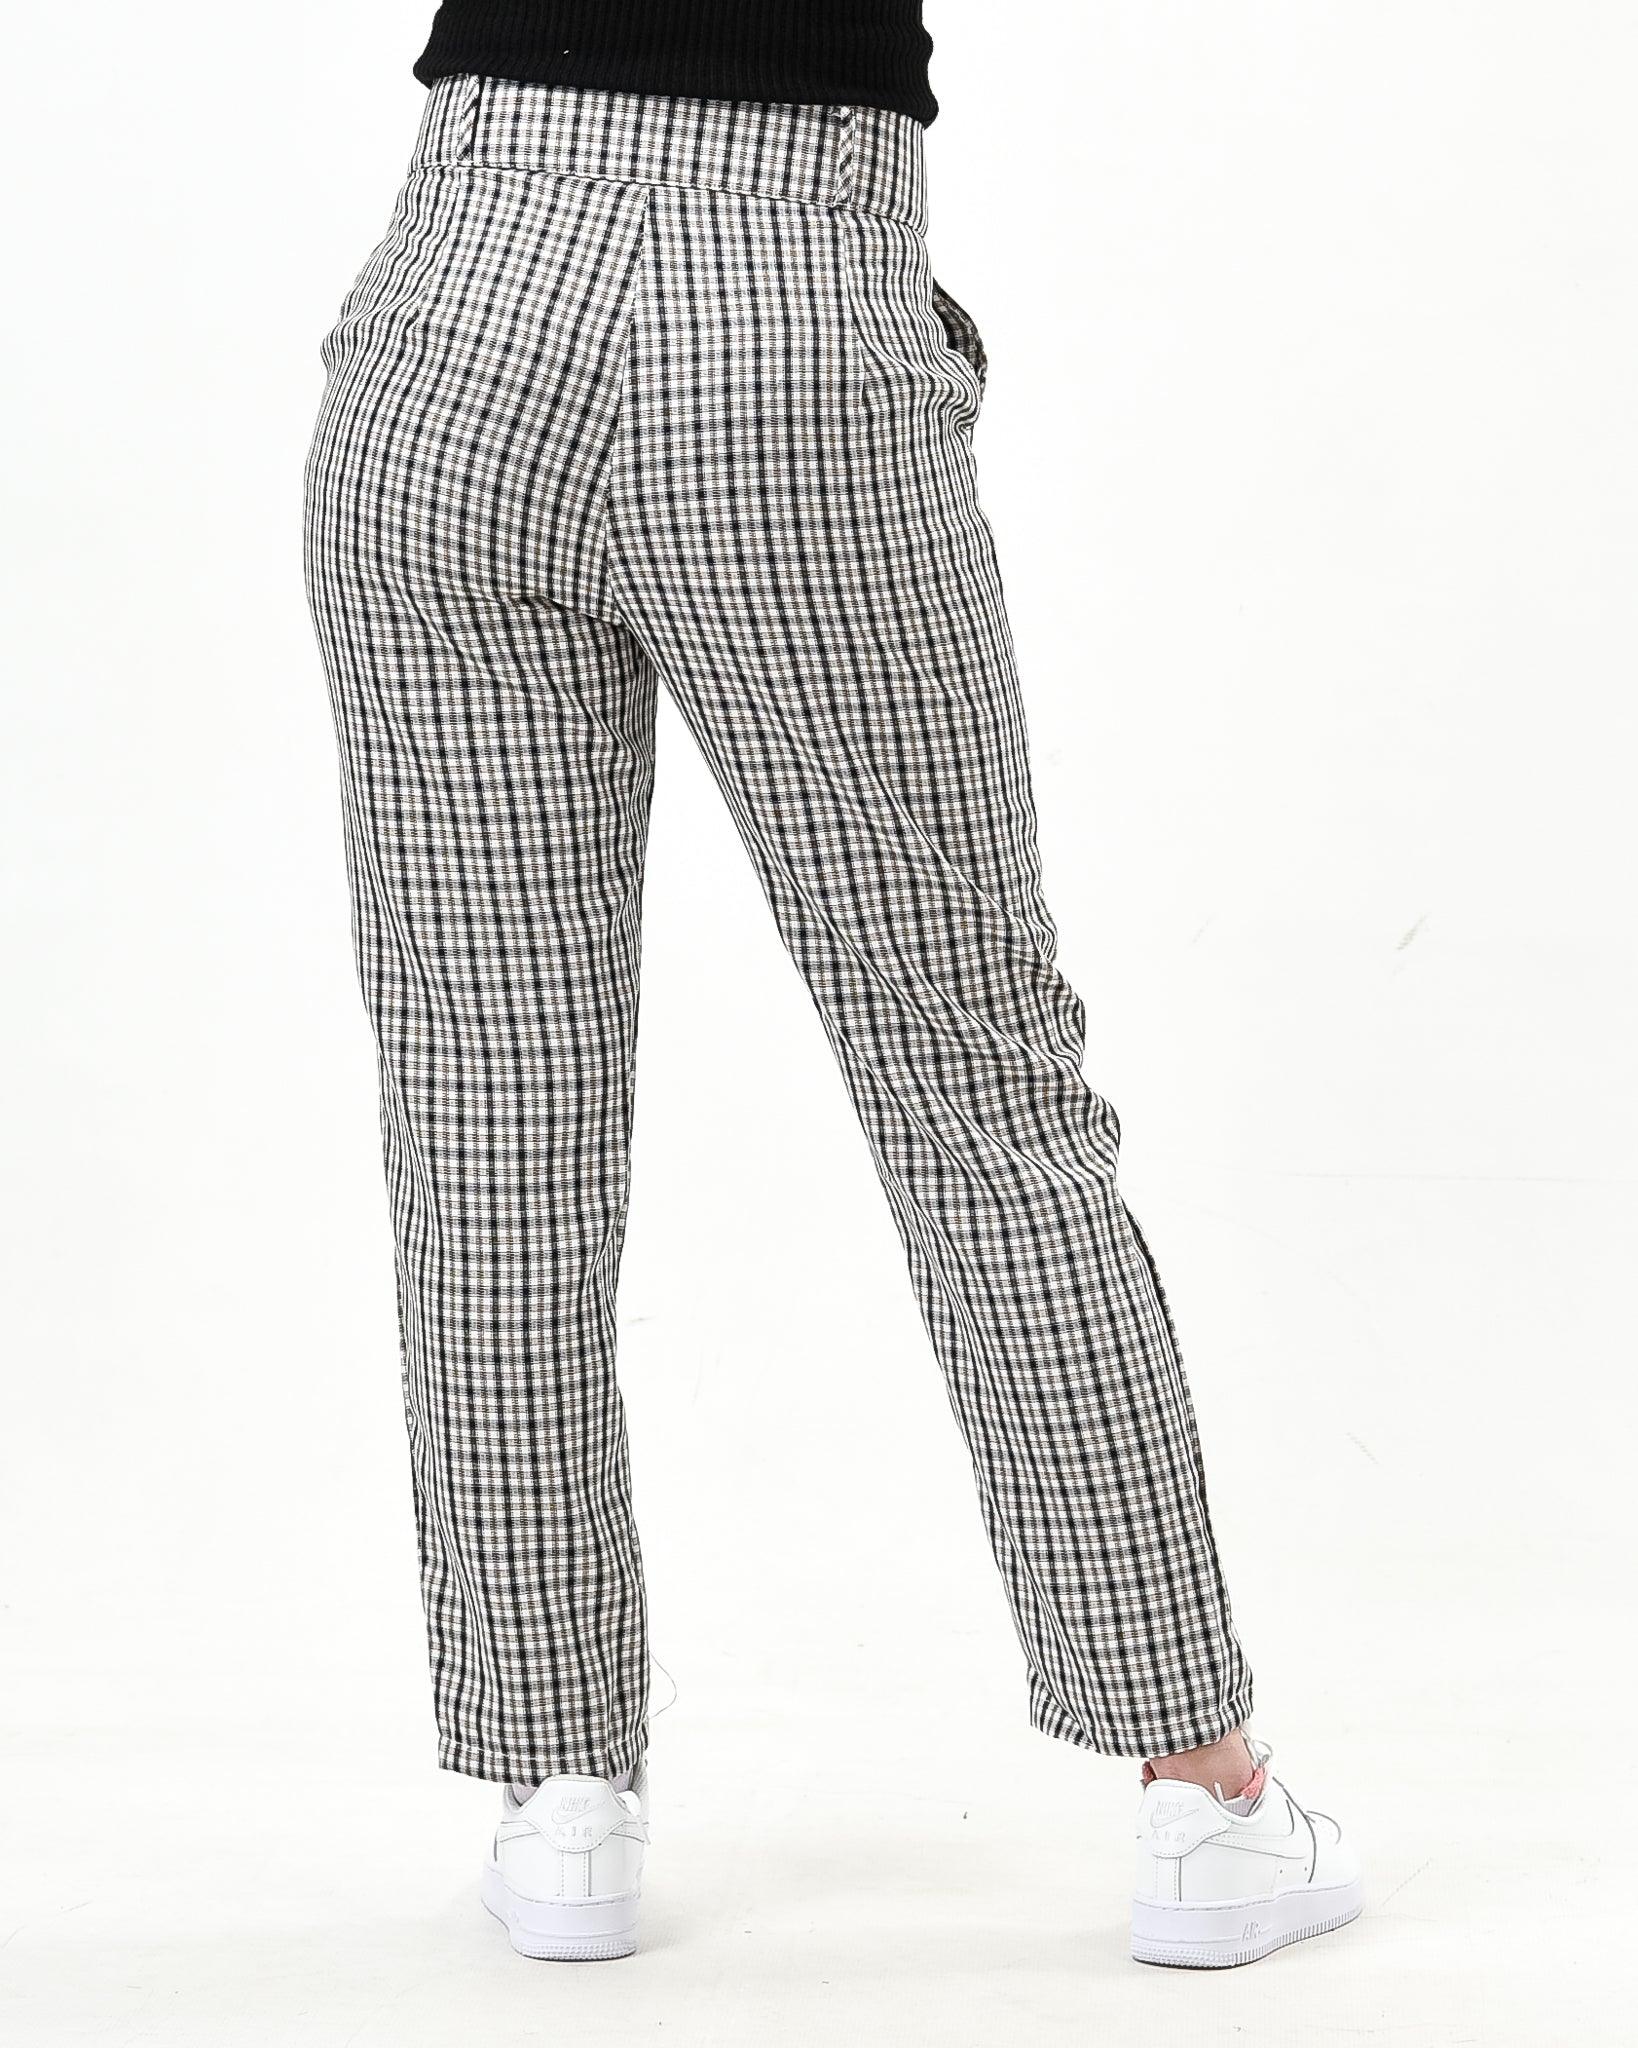 Plaid straight cut pants with pockets - XD21